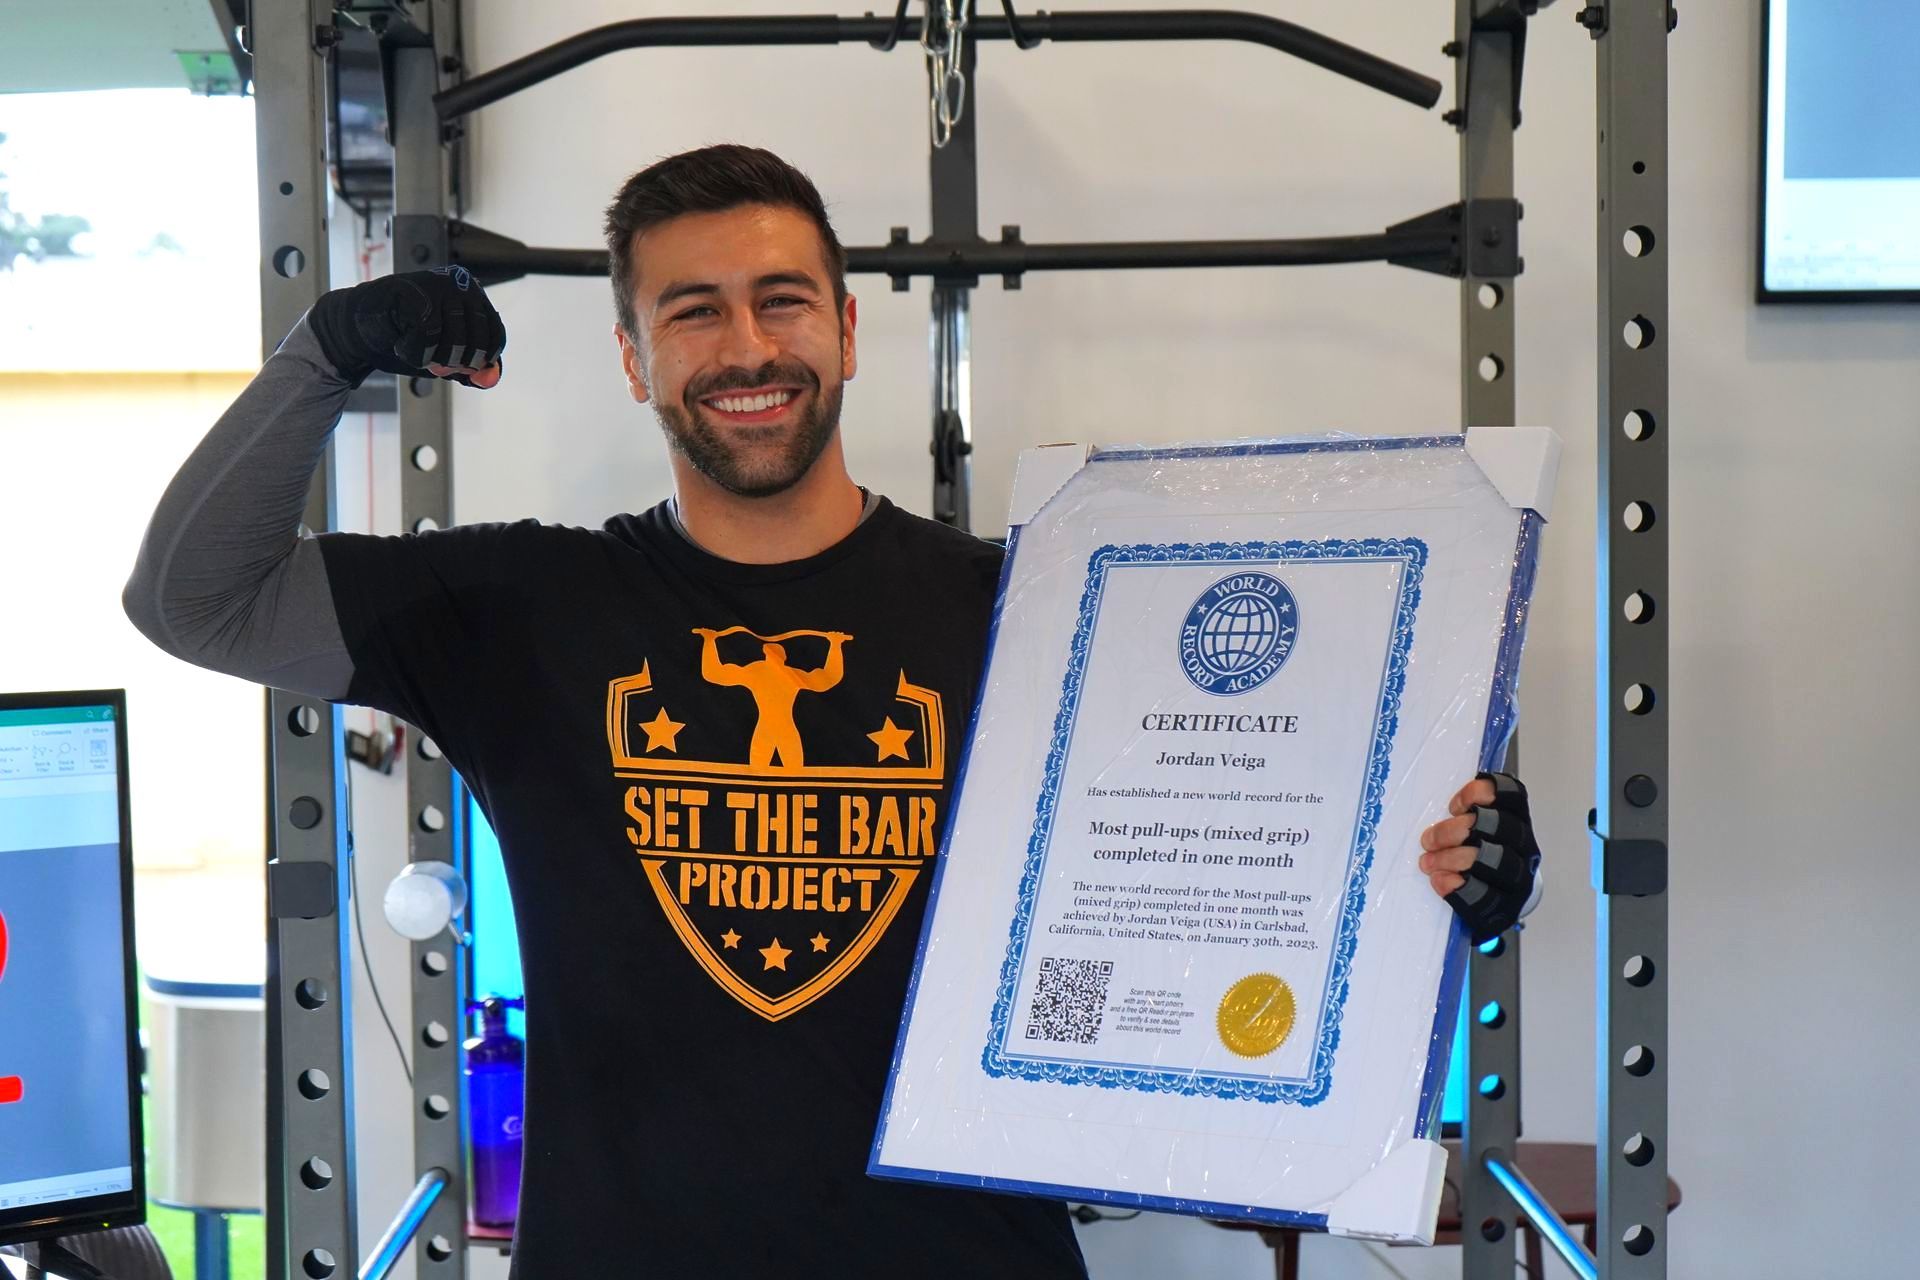 Most Pull Ups In A Month (Mixed Grip): Jordan Veiga sets world record